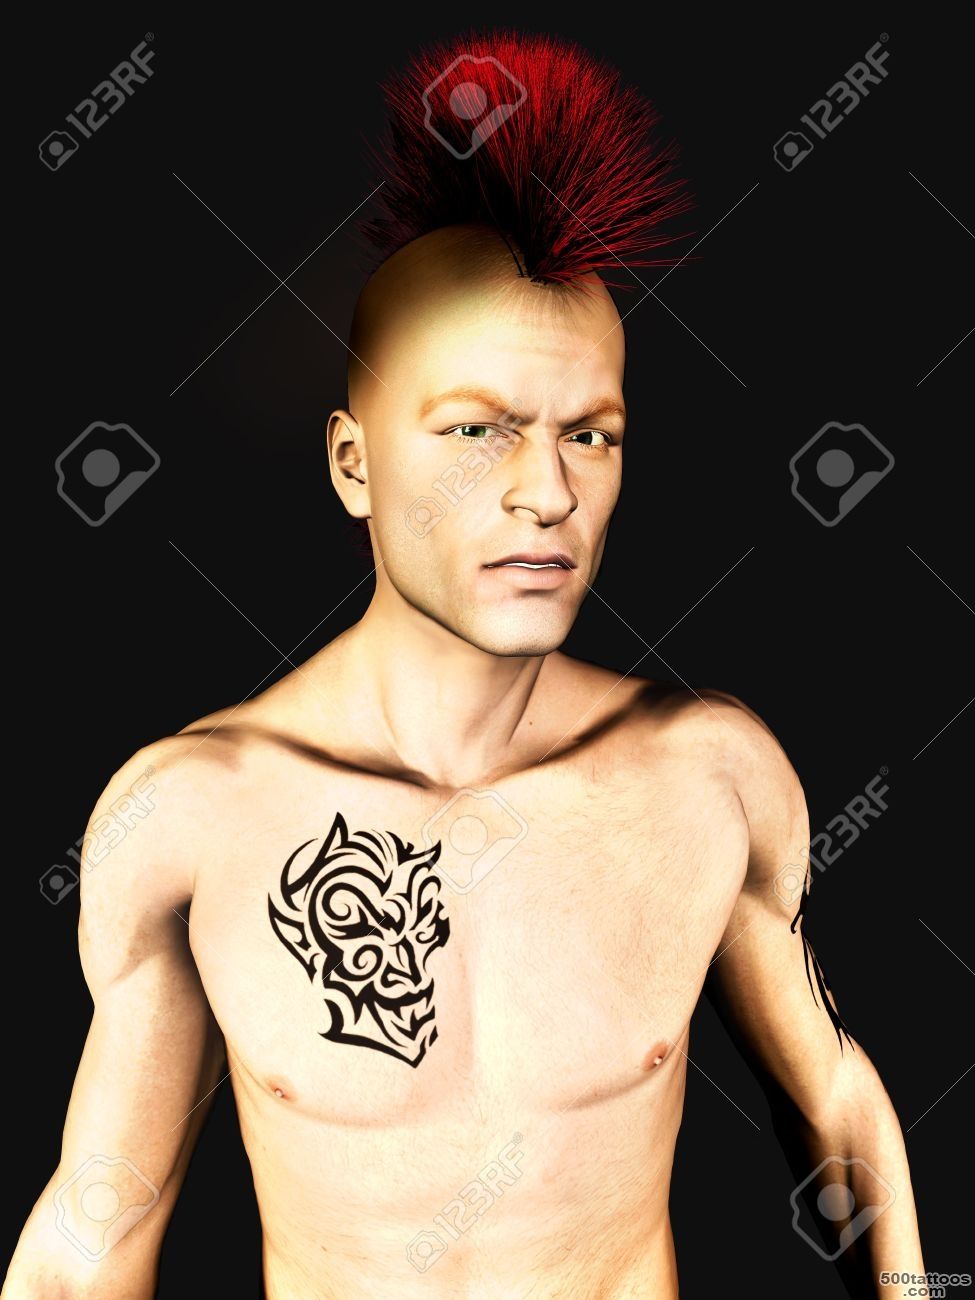 A Male Punk Rocker With A Mohawk Hair And A Tattoo On His Arm ..._29